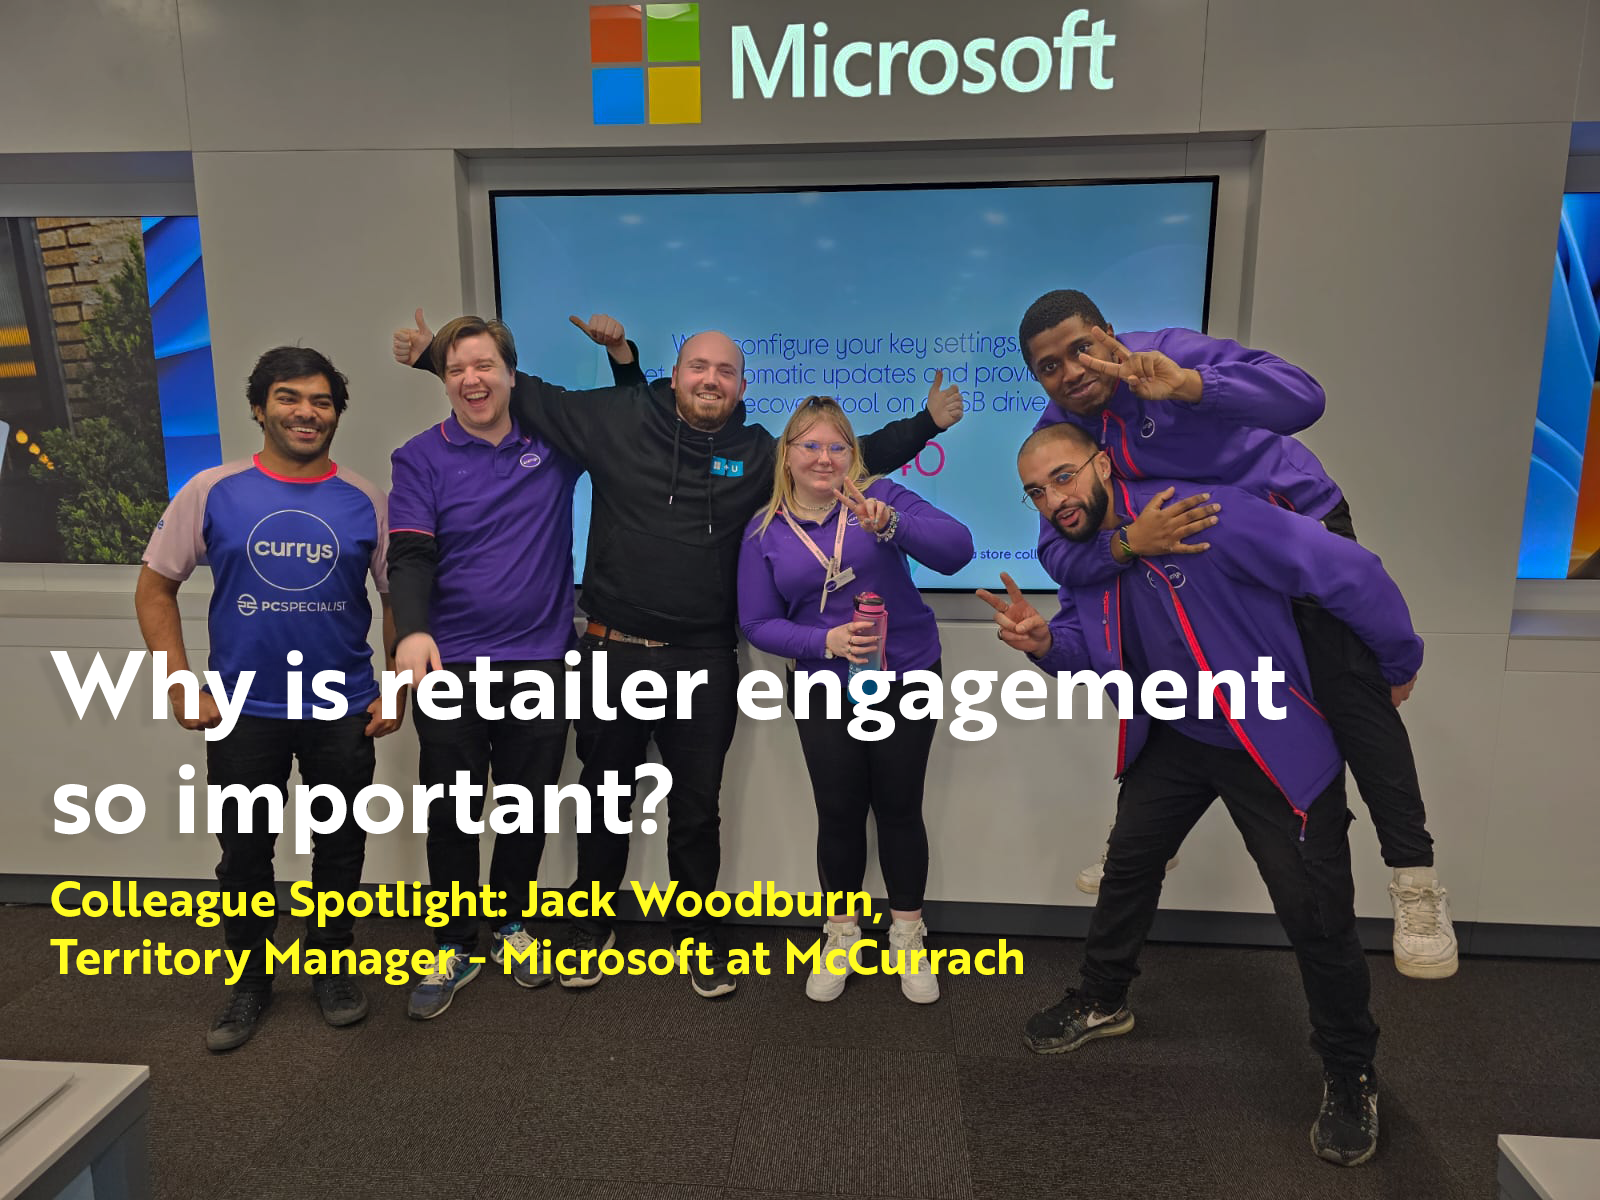 Why is retailer engagement so important? Colleague Spotlight: Jack Woodburn, Territory Manager - Microsoft